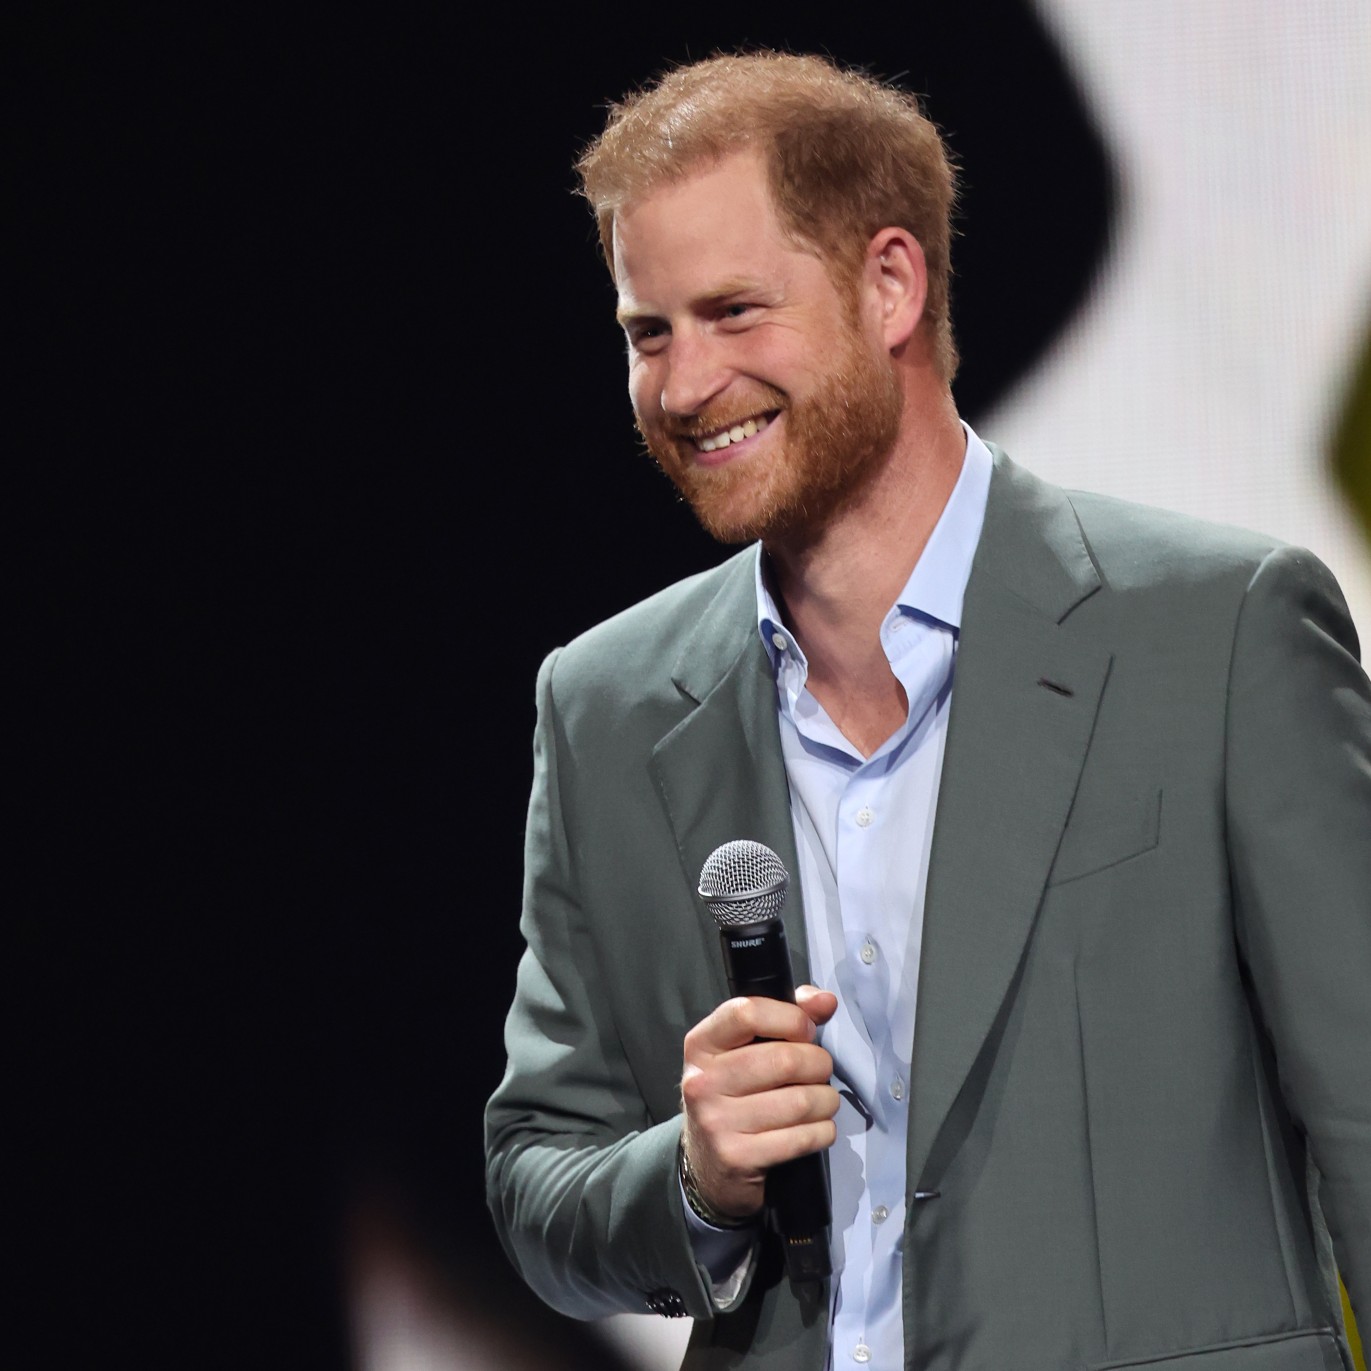 Prince Harry at the Invictus Games Opening Ceremony